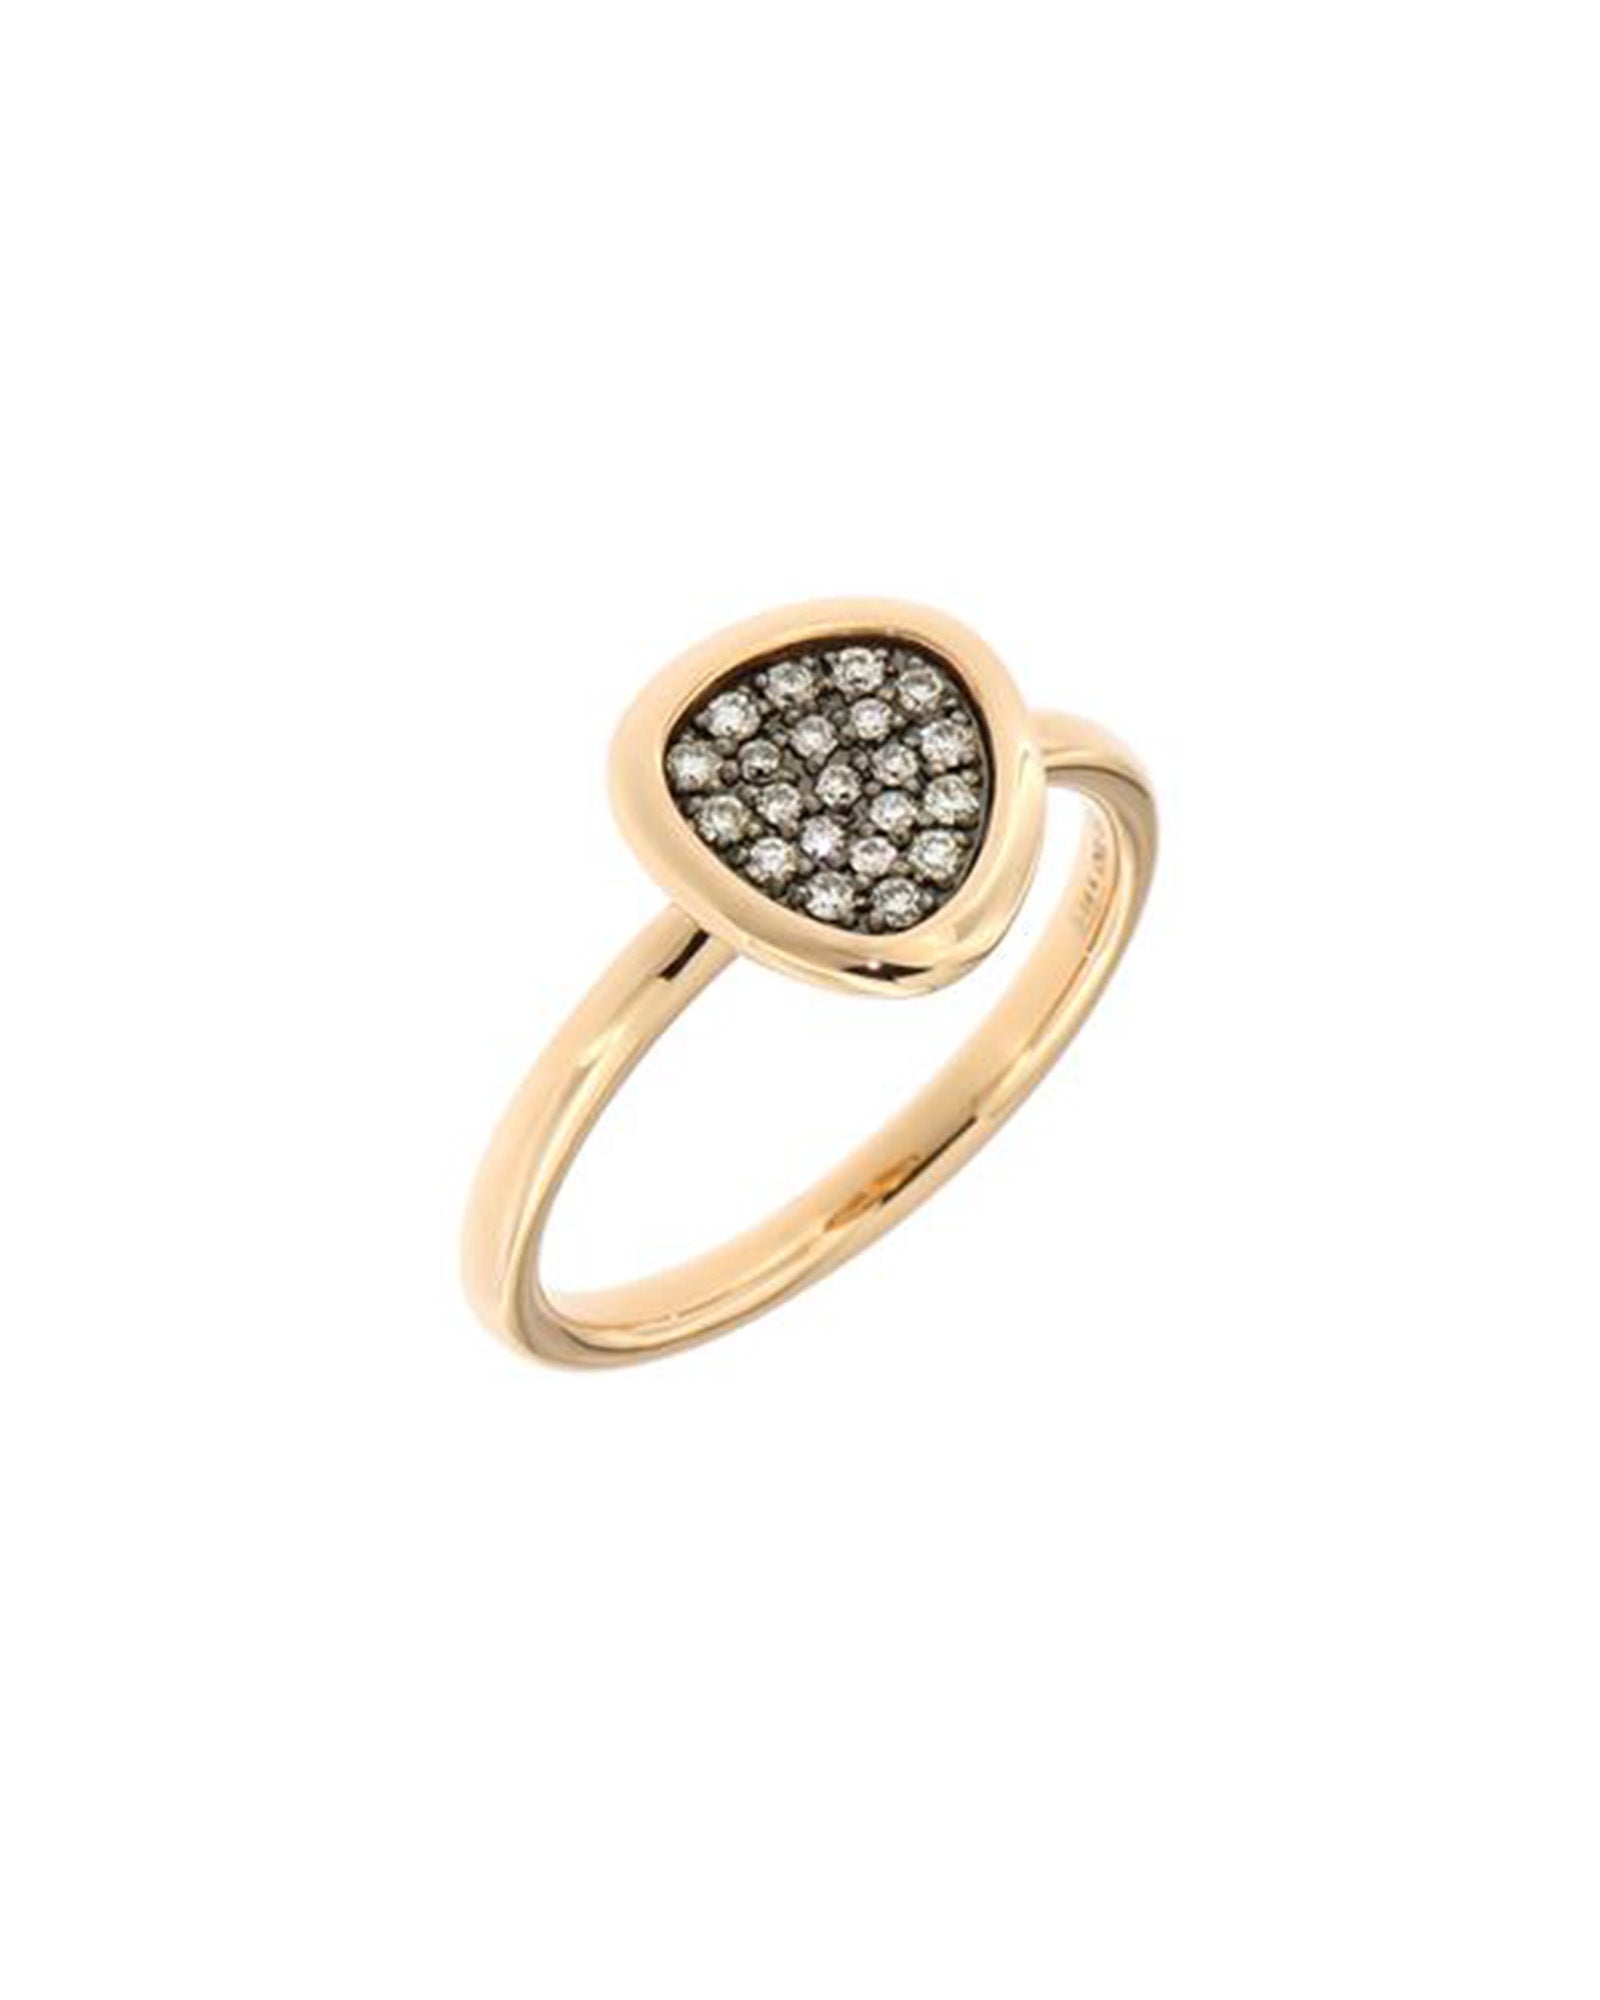 Drop Ring with brown diamonds